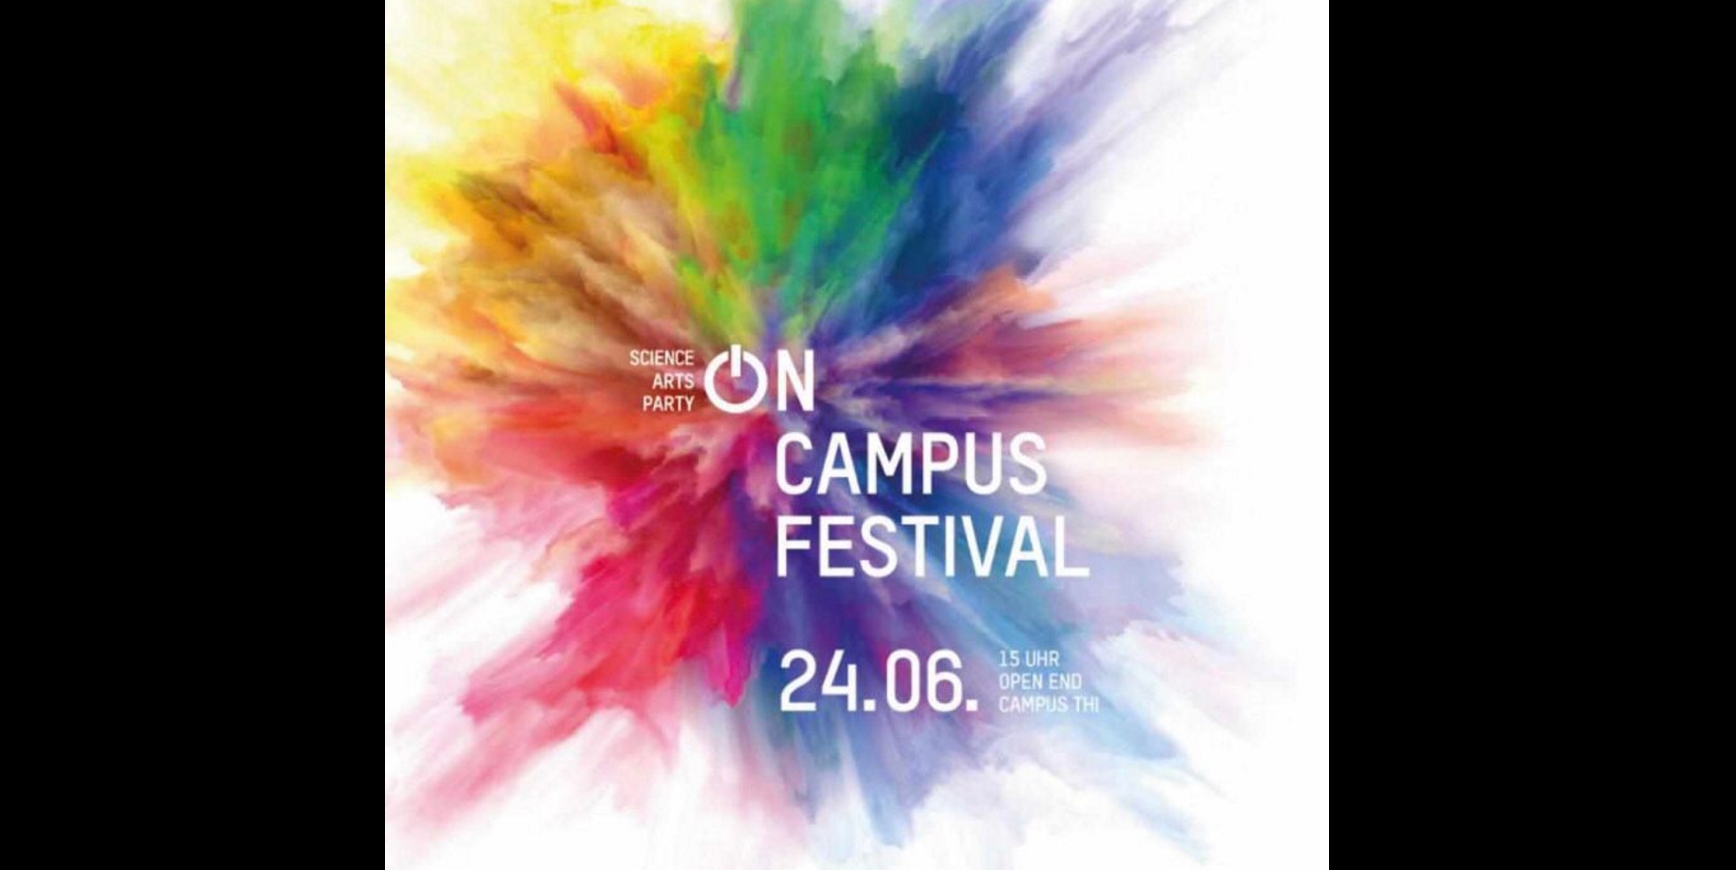 THI Campusfestival